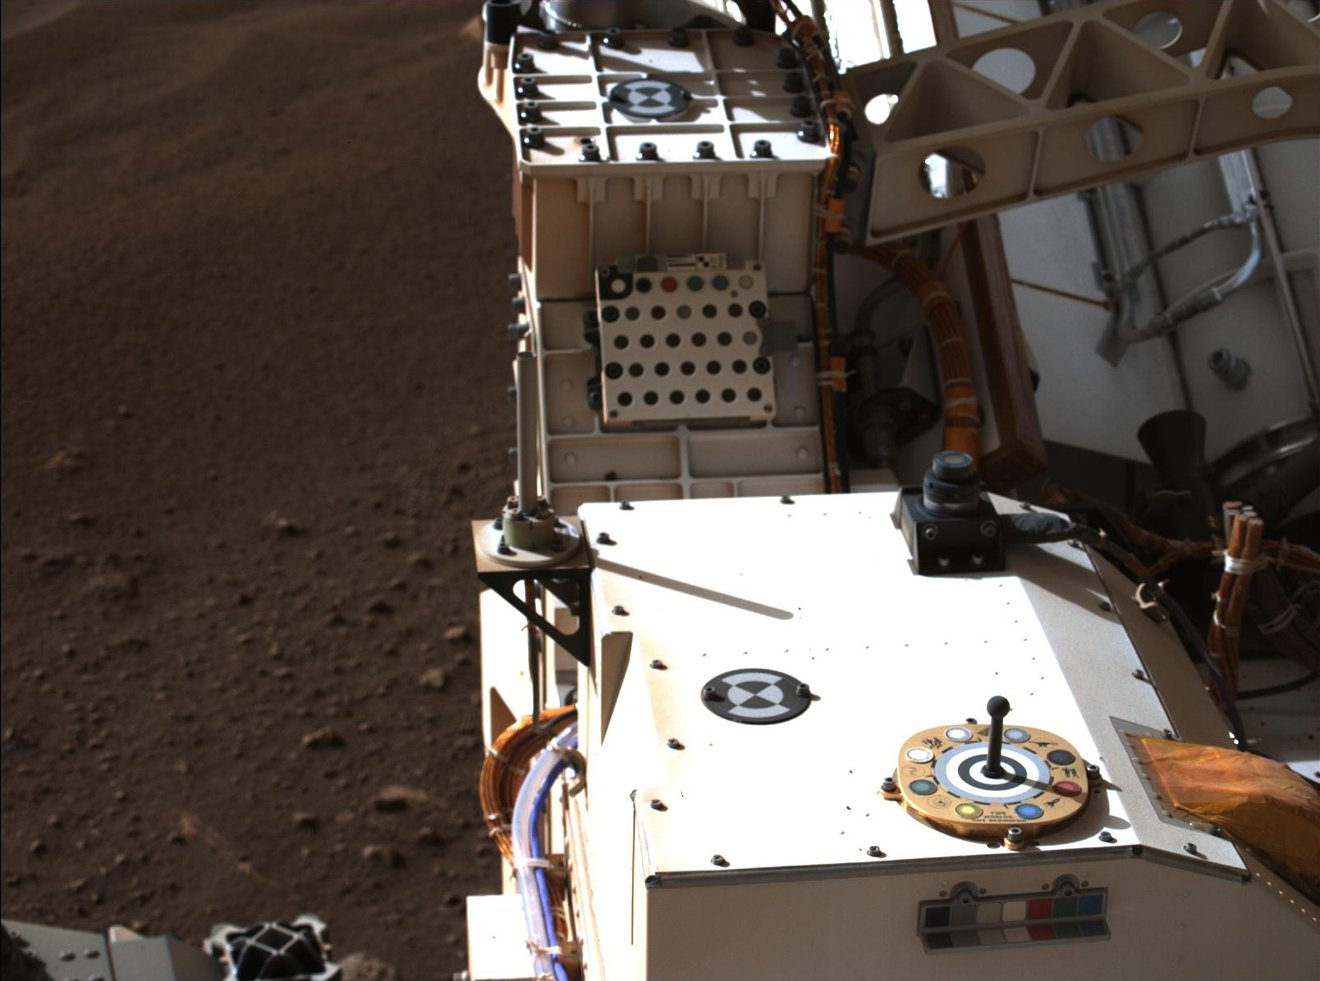 Image from NASA's Perseverance rover